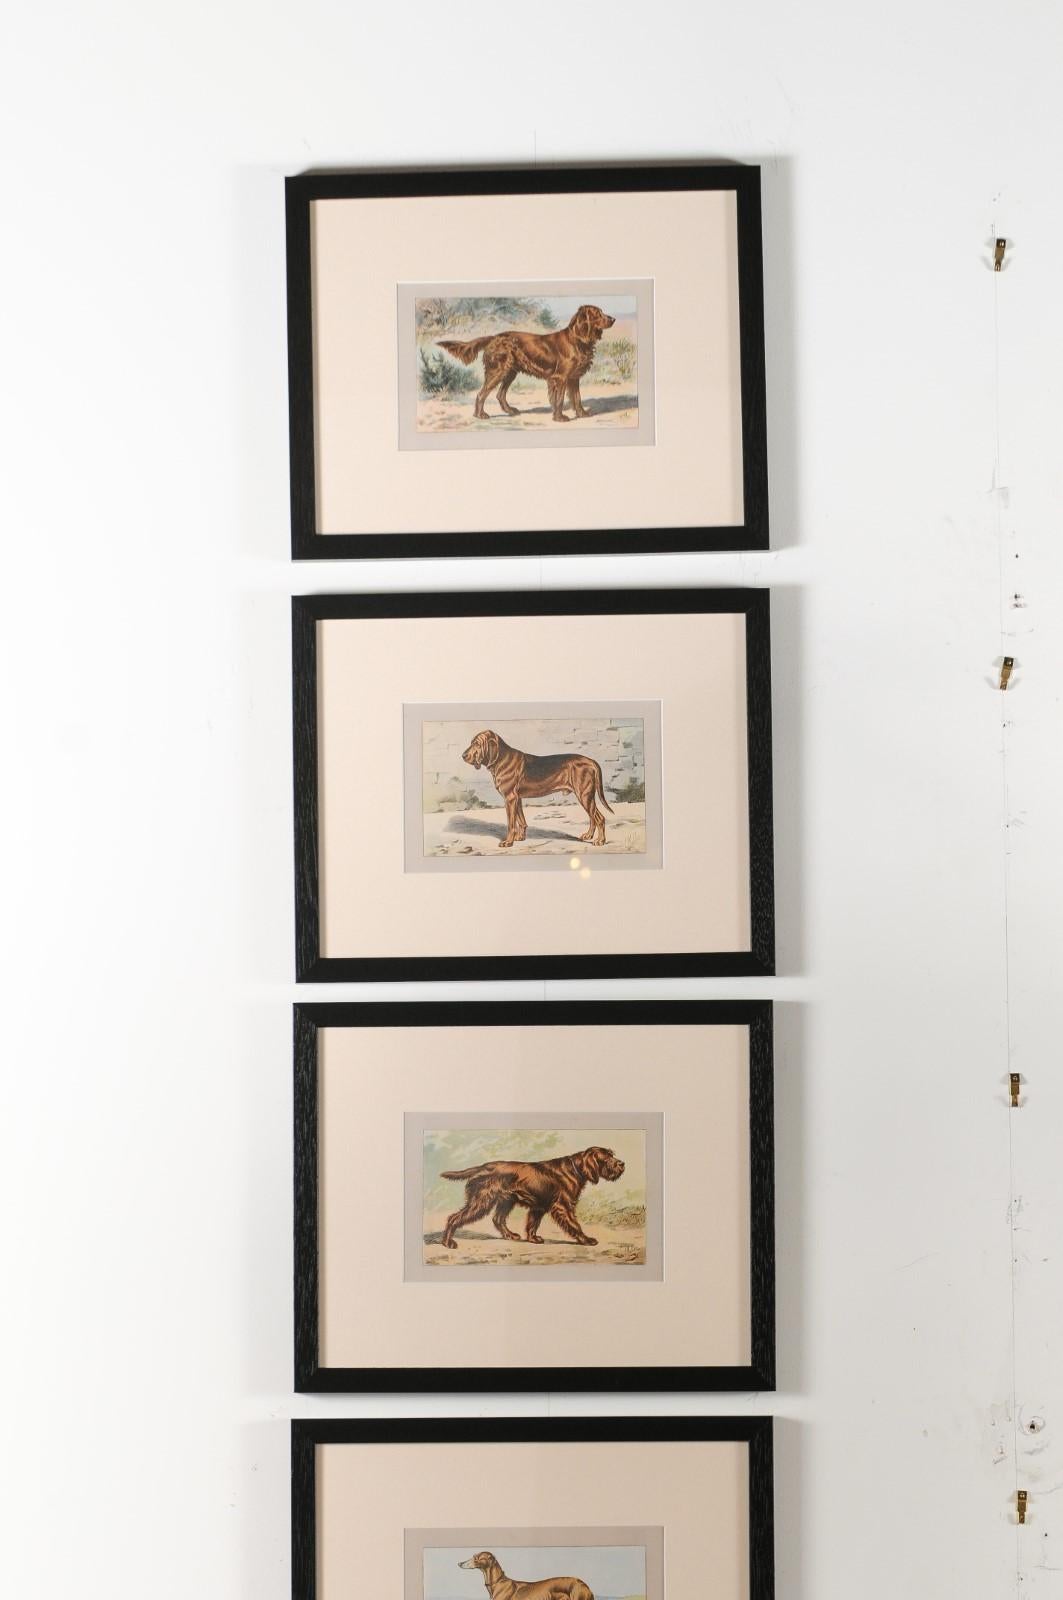 P. Mahler Custom Framed Lithographs Depicting Hunting Dogs in Outdoor Scenes 2